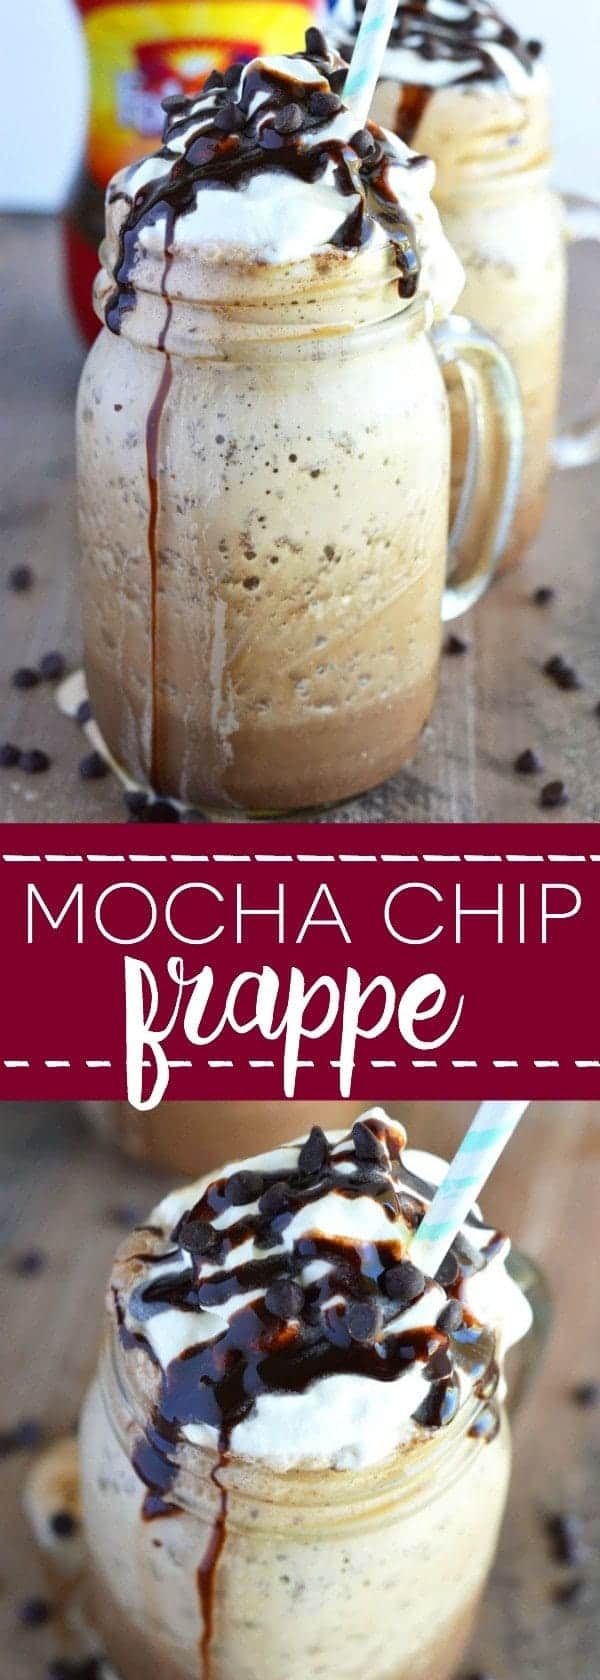 Mocha Chip Frappe from What The Fork Food Blog | whattheforkfoodblog.com | coffee recipes | Starbucks copycat | #coffee #mocha #Starbucks #frozencoffee